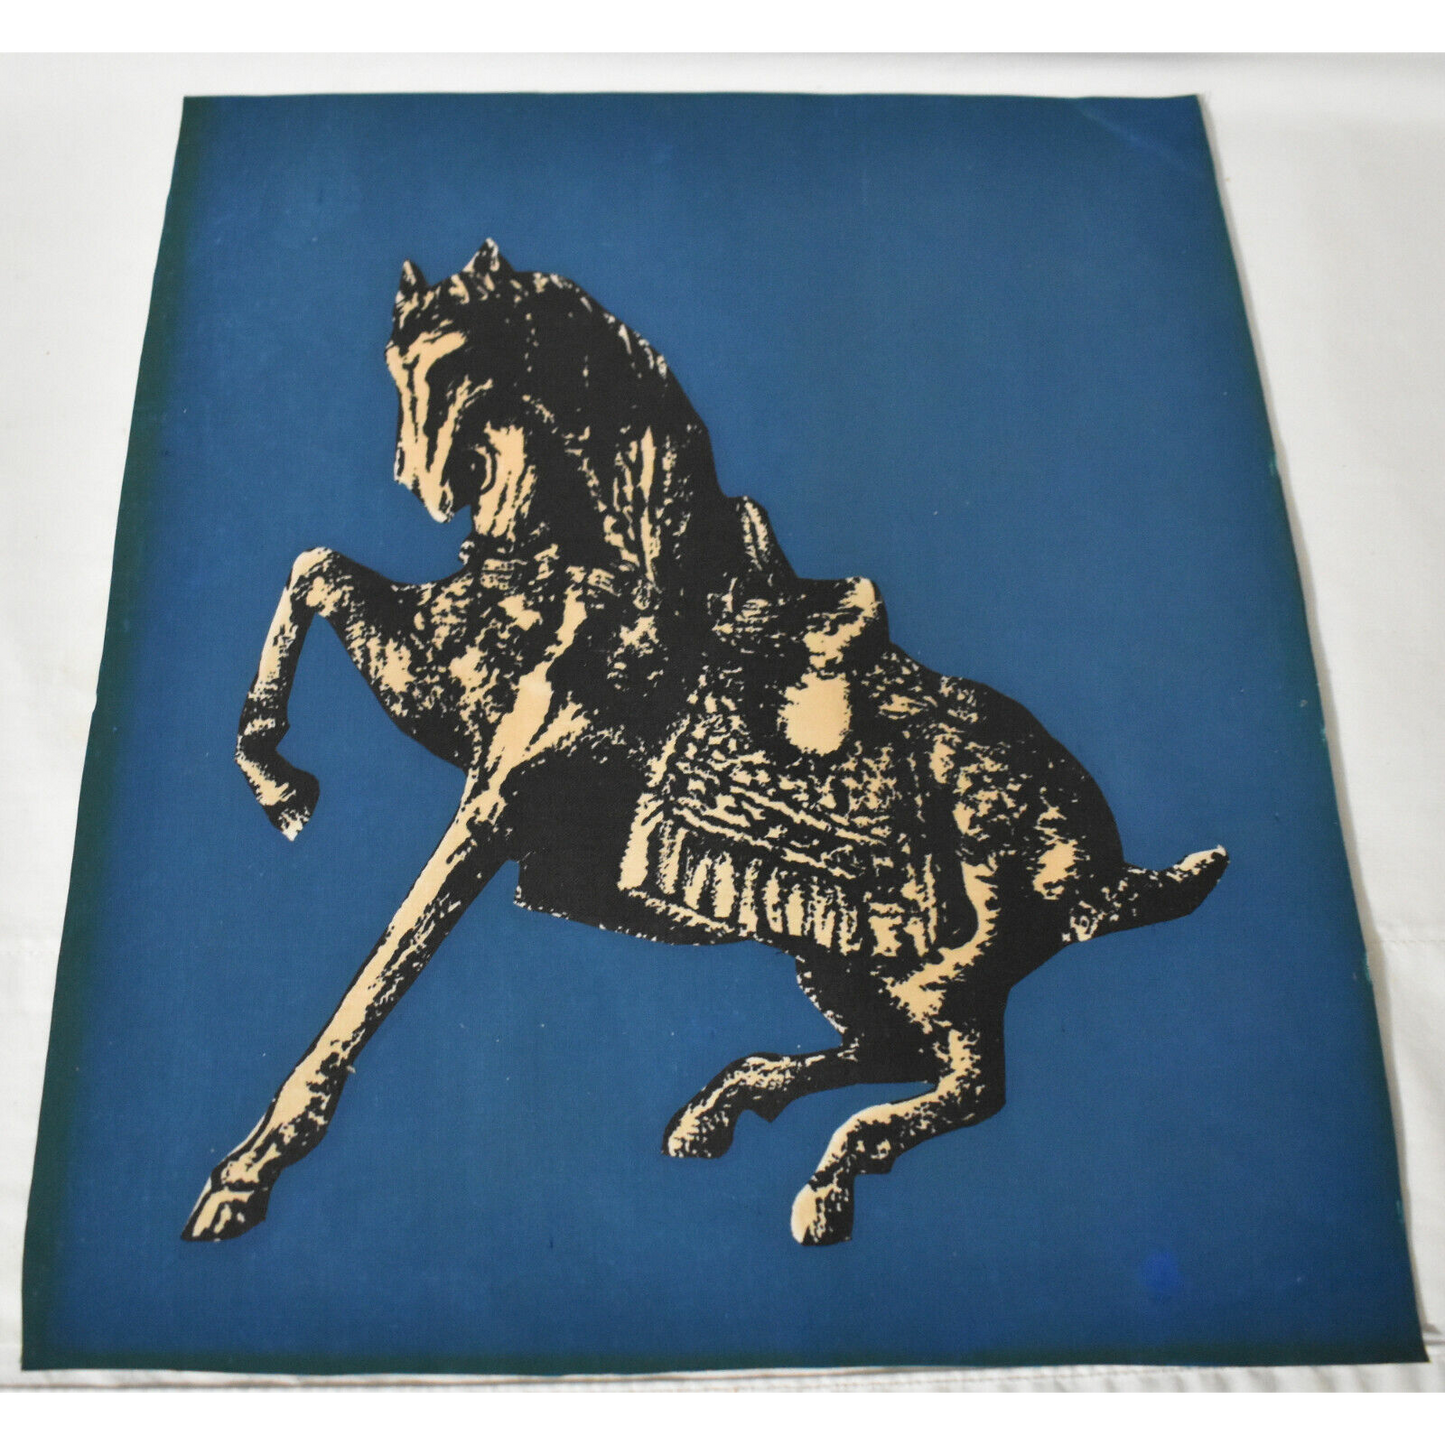 Vintage Asian War Horse Screen Print on Rice Paper or Linen 15 x 13" Wall Decor